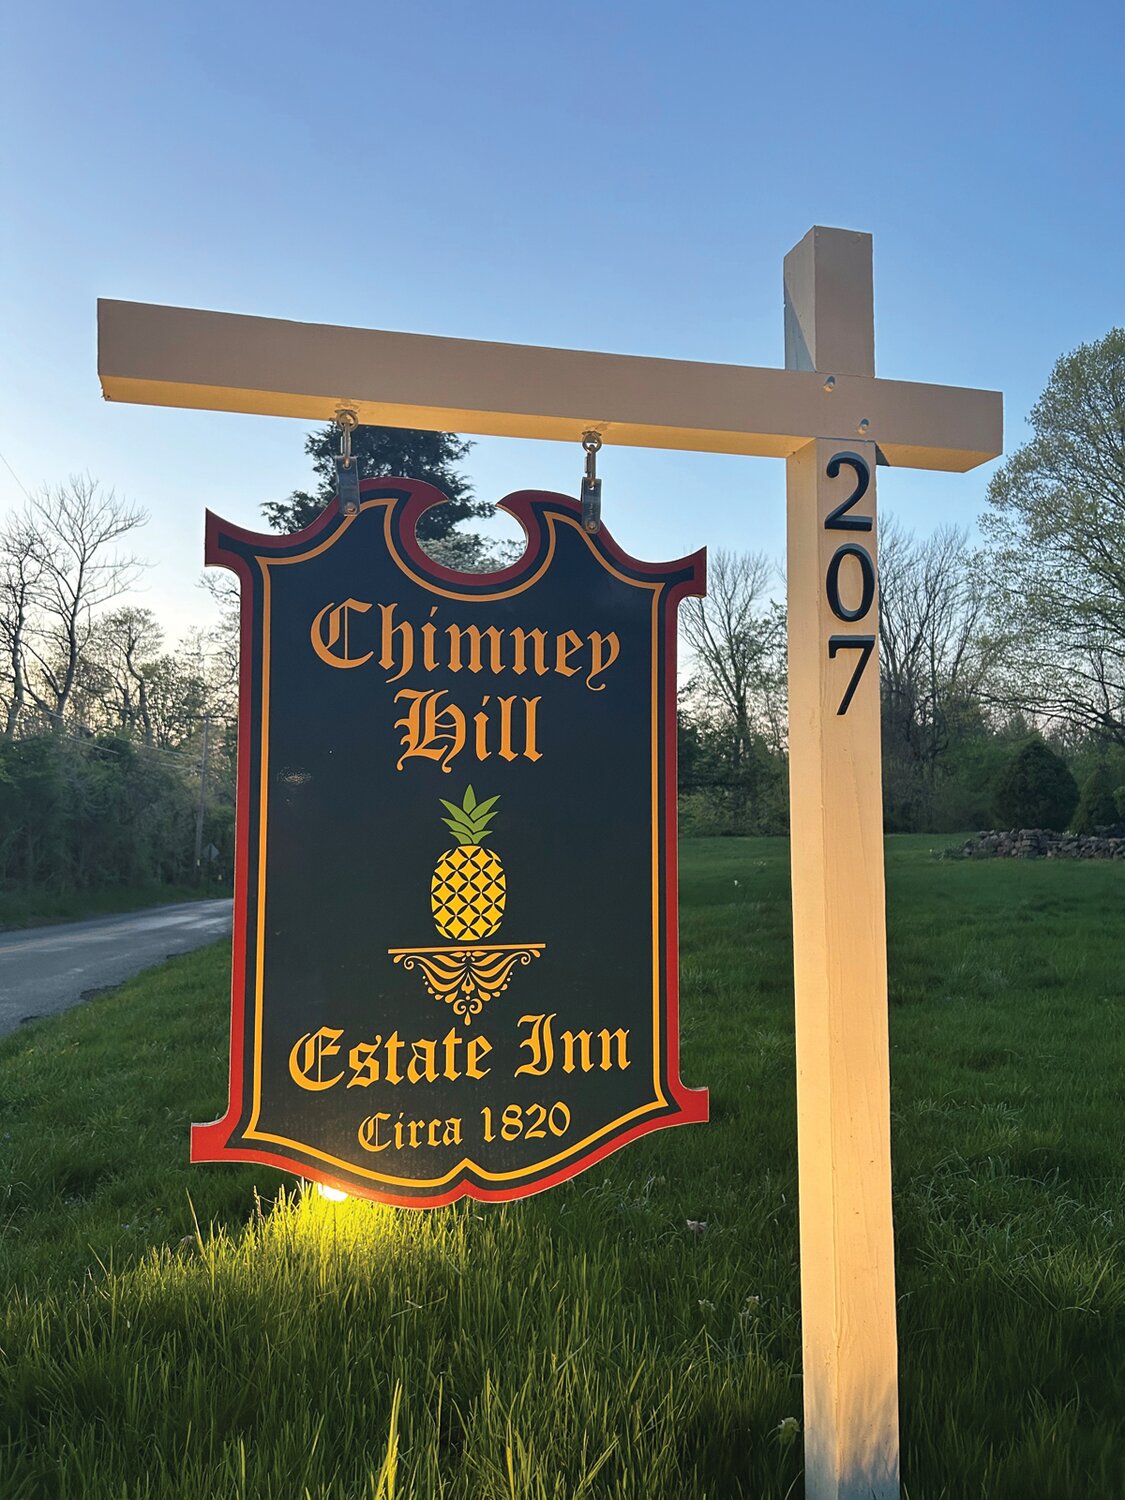 A sign welcomes guests to Chimney Hill.